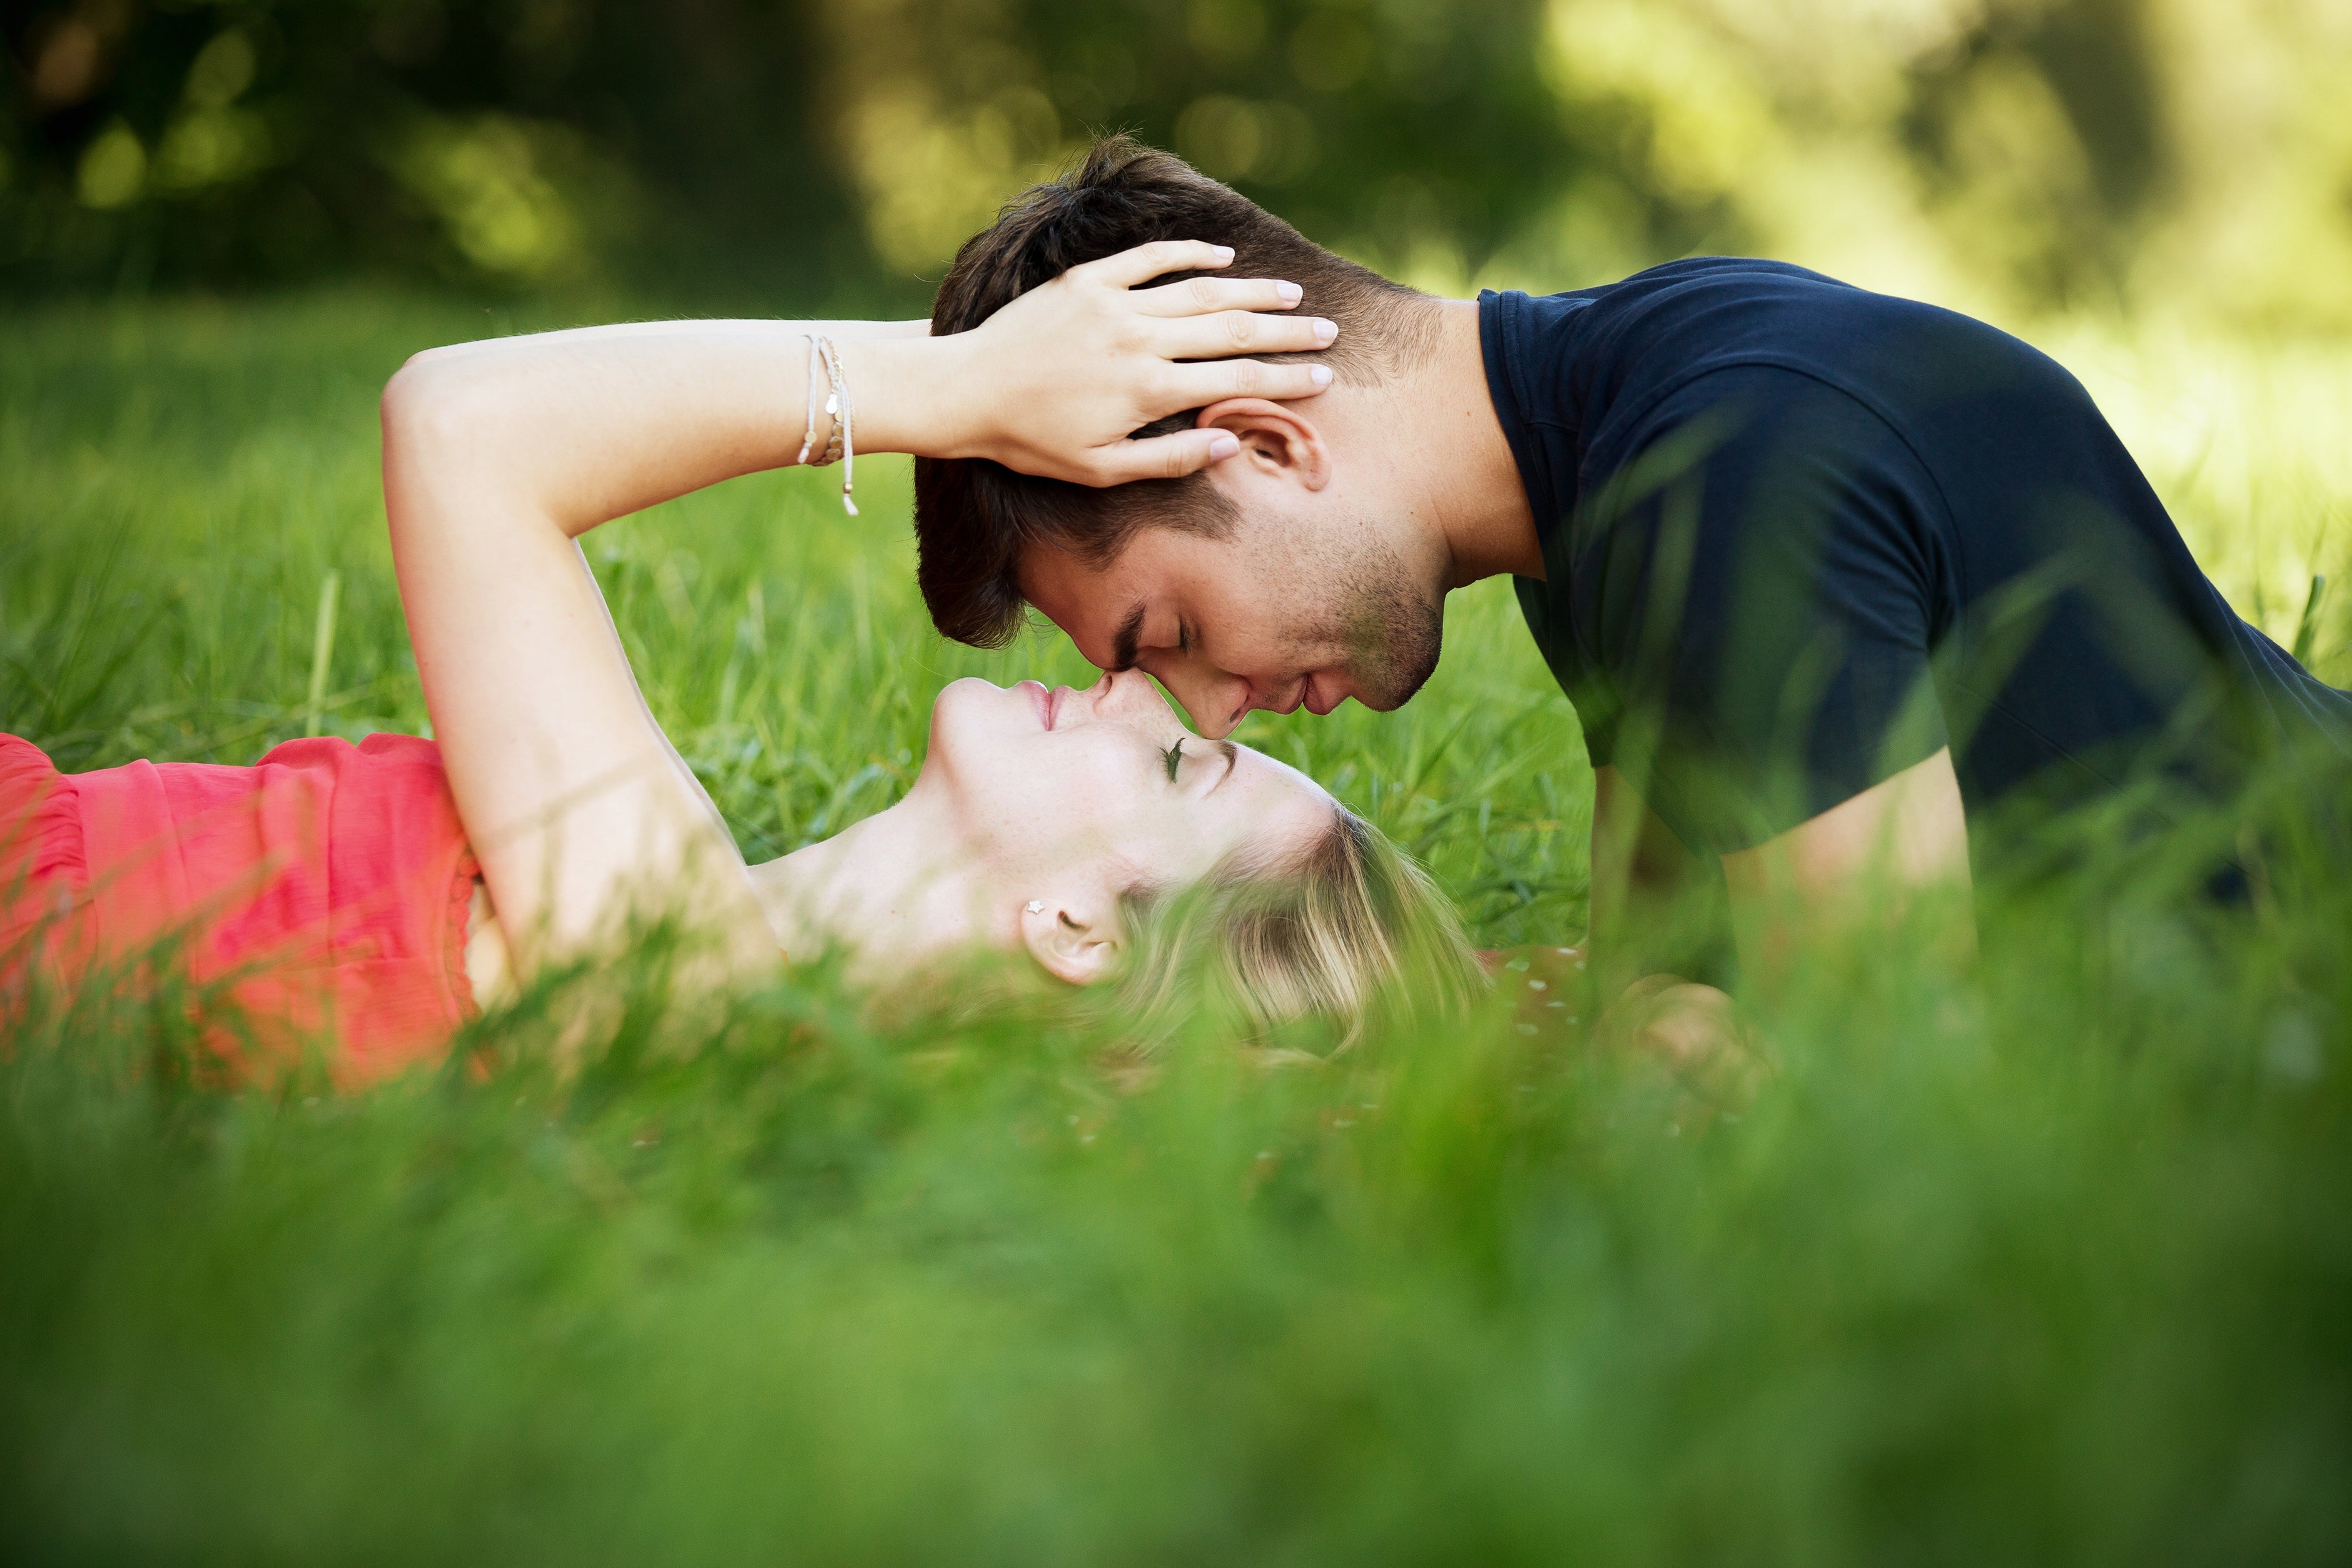 What People Find Most Attractive About Their Romantic Partner's Mind